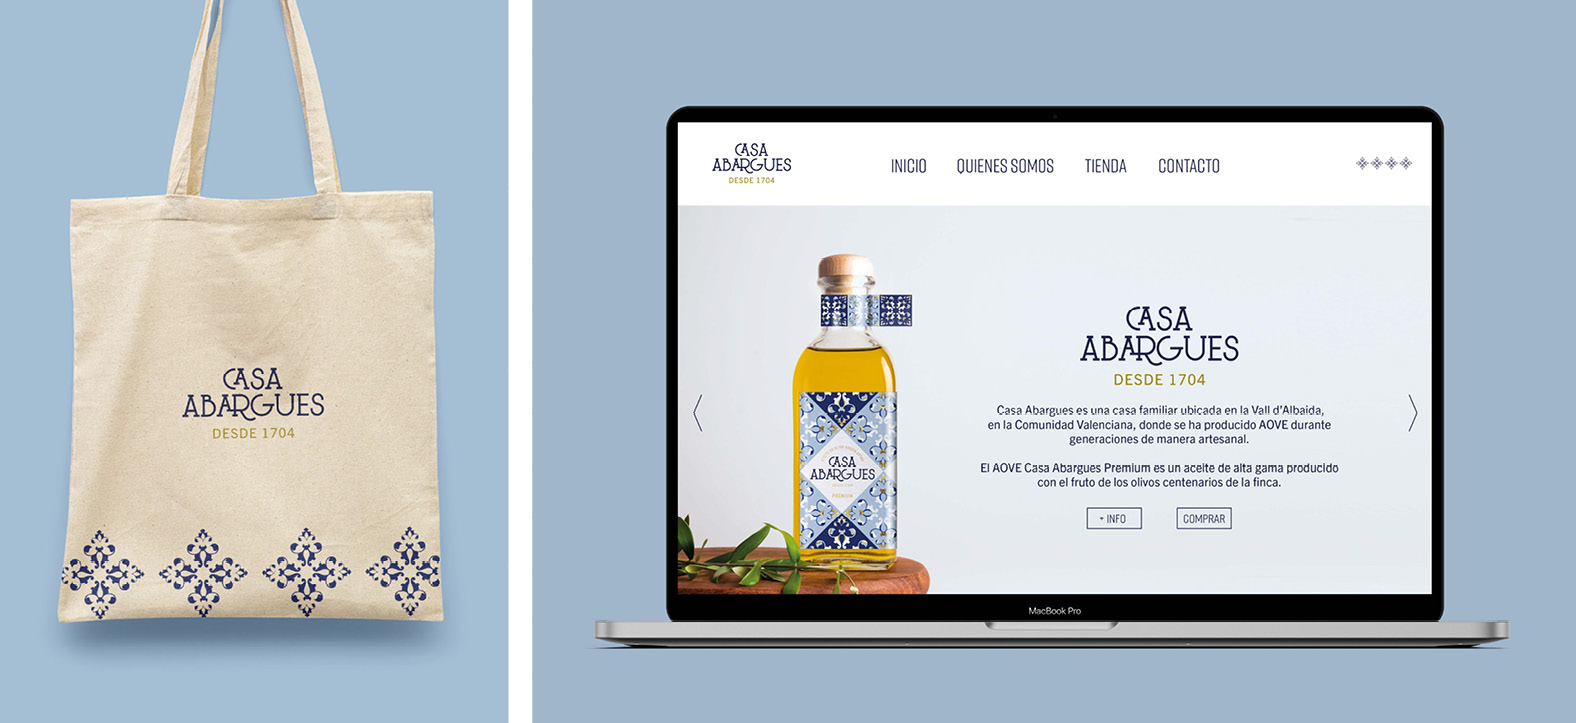 Aceite de Oliva Virgen Extra Premium Casa Abargues by Carla Gil Adrover - Creative Work - $i